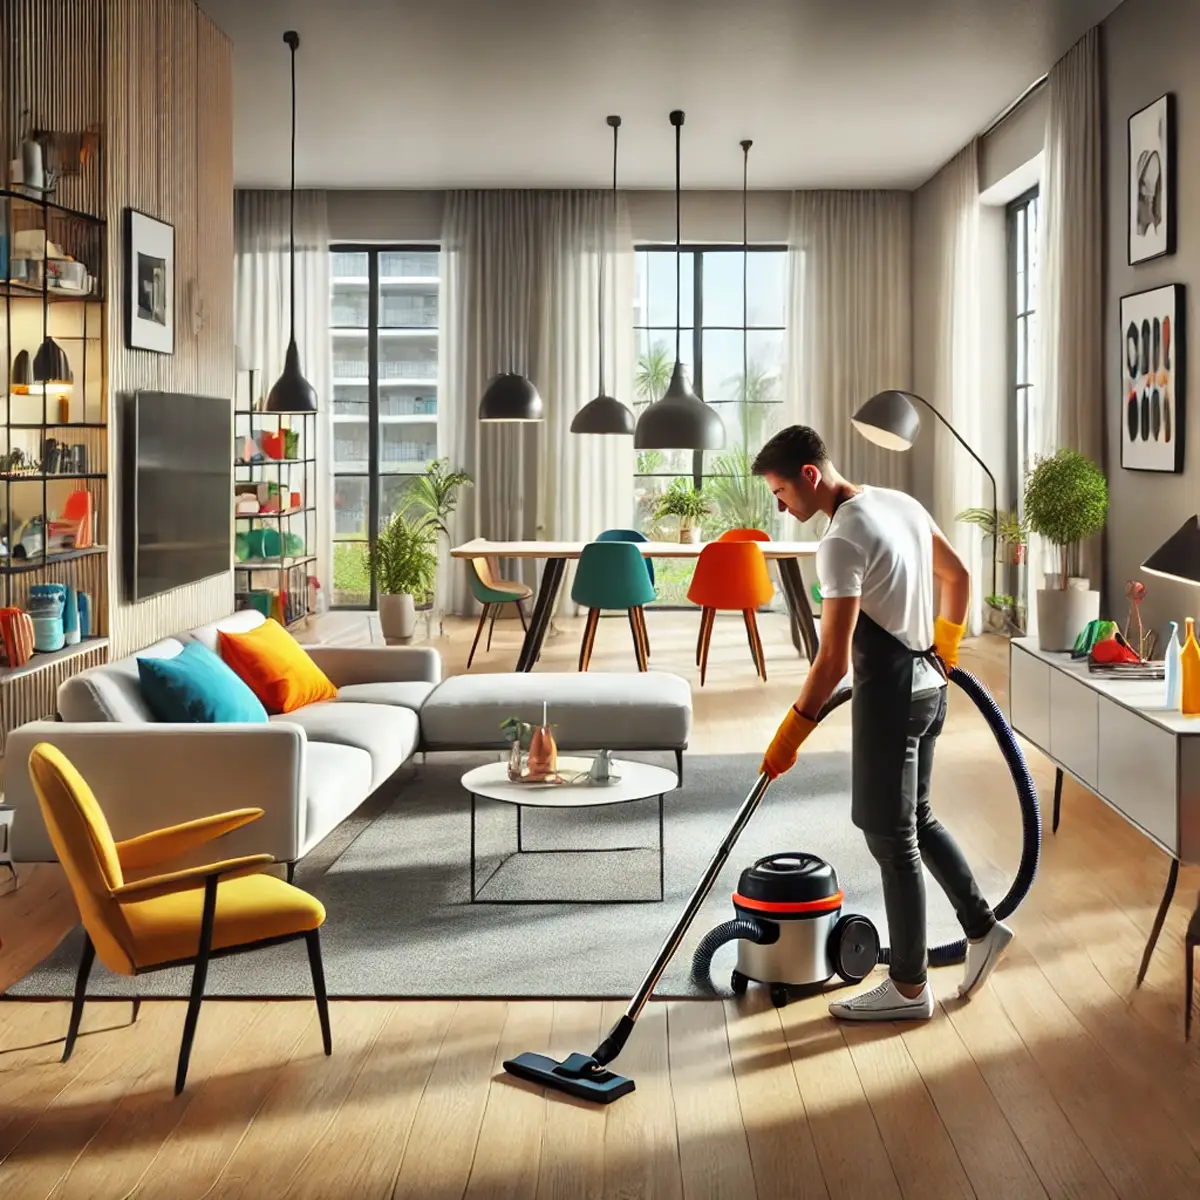 Housekeeping Cleaning Services Proposal Concepts